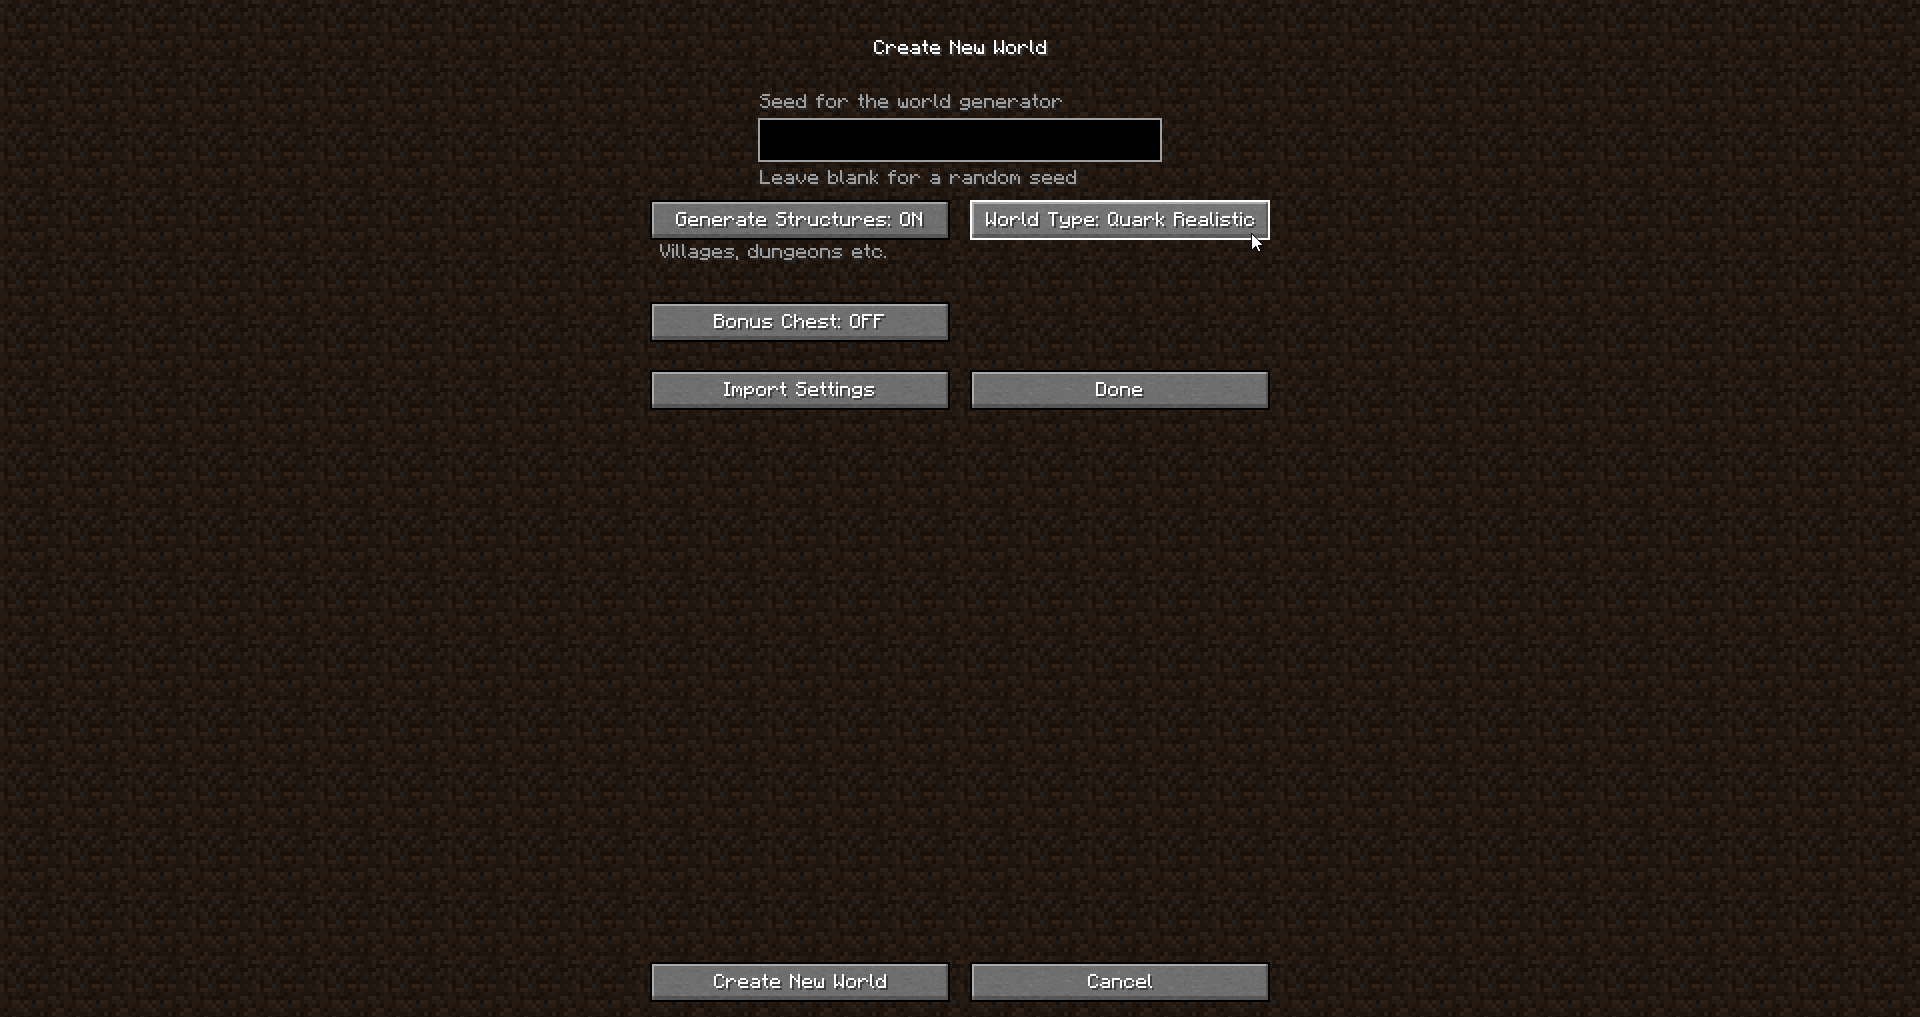 Vazkii S Mods Now Available In The Latest Version 1 16 Quark Realistic Worldgen Pick It At World Creation To Use It On A Server Set The Level Type In Your Server Properties To Realistic Grab It T Co Upho2ufitu T Co Ysljaliu7n